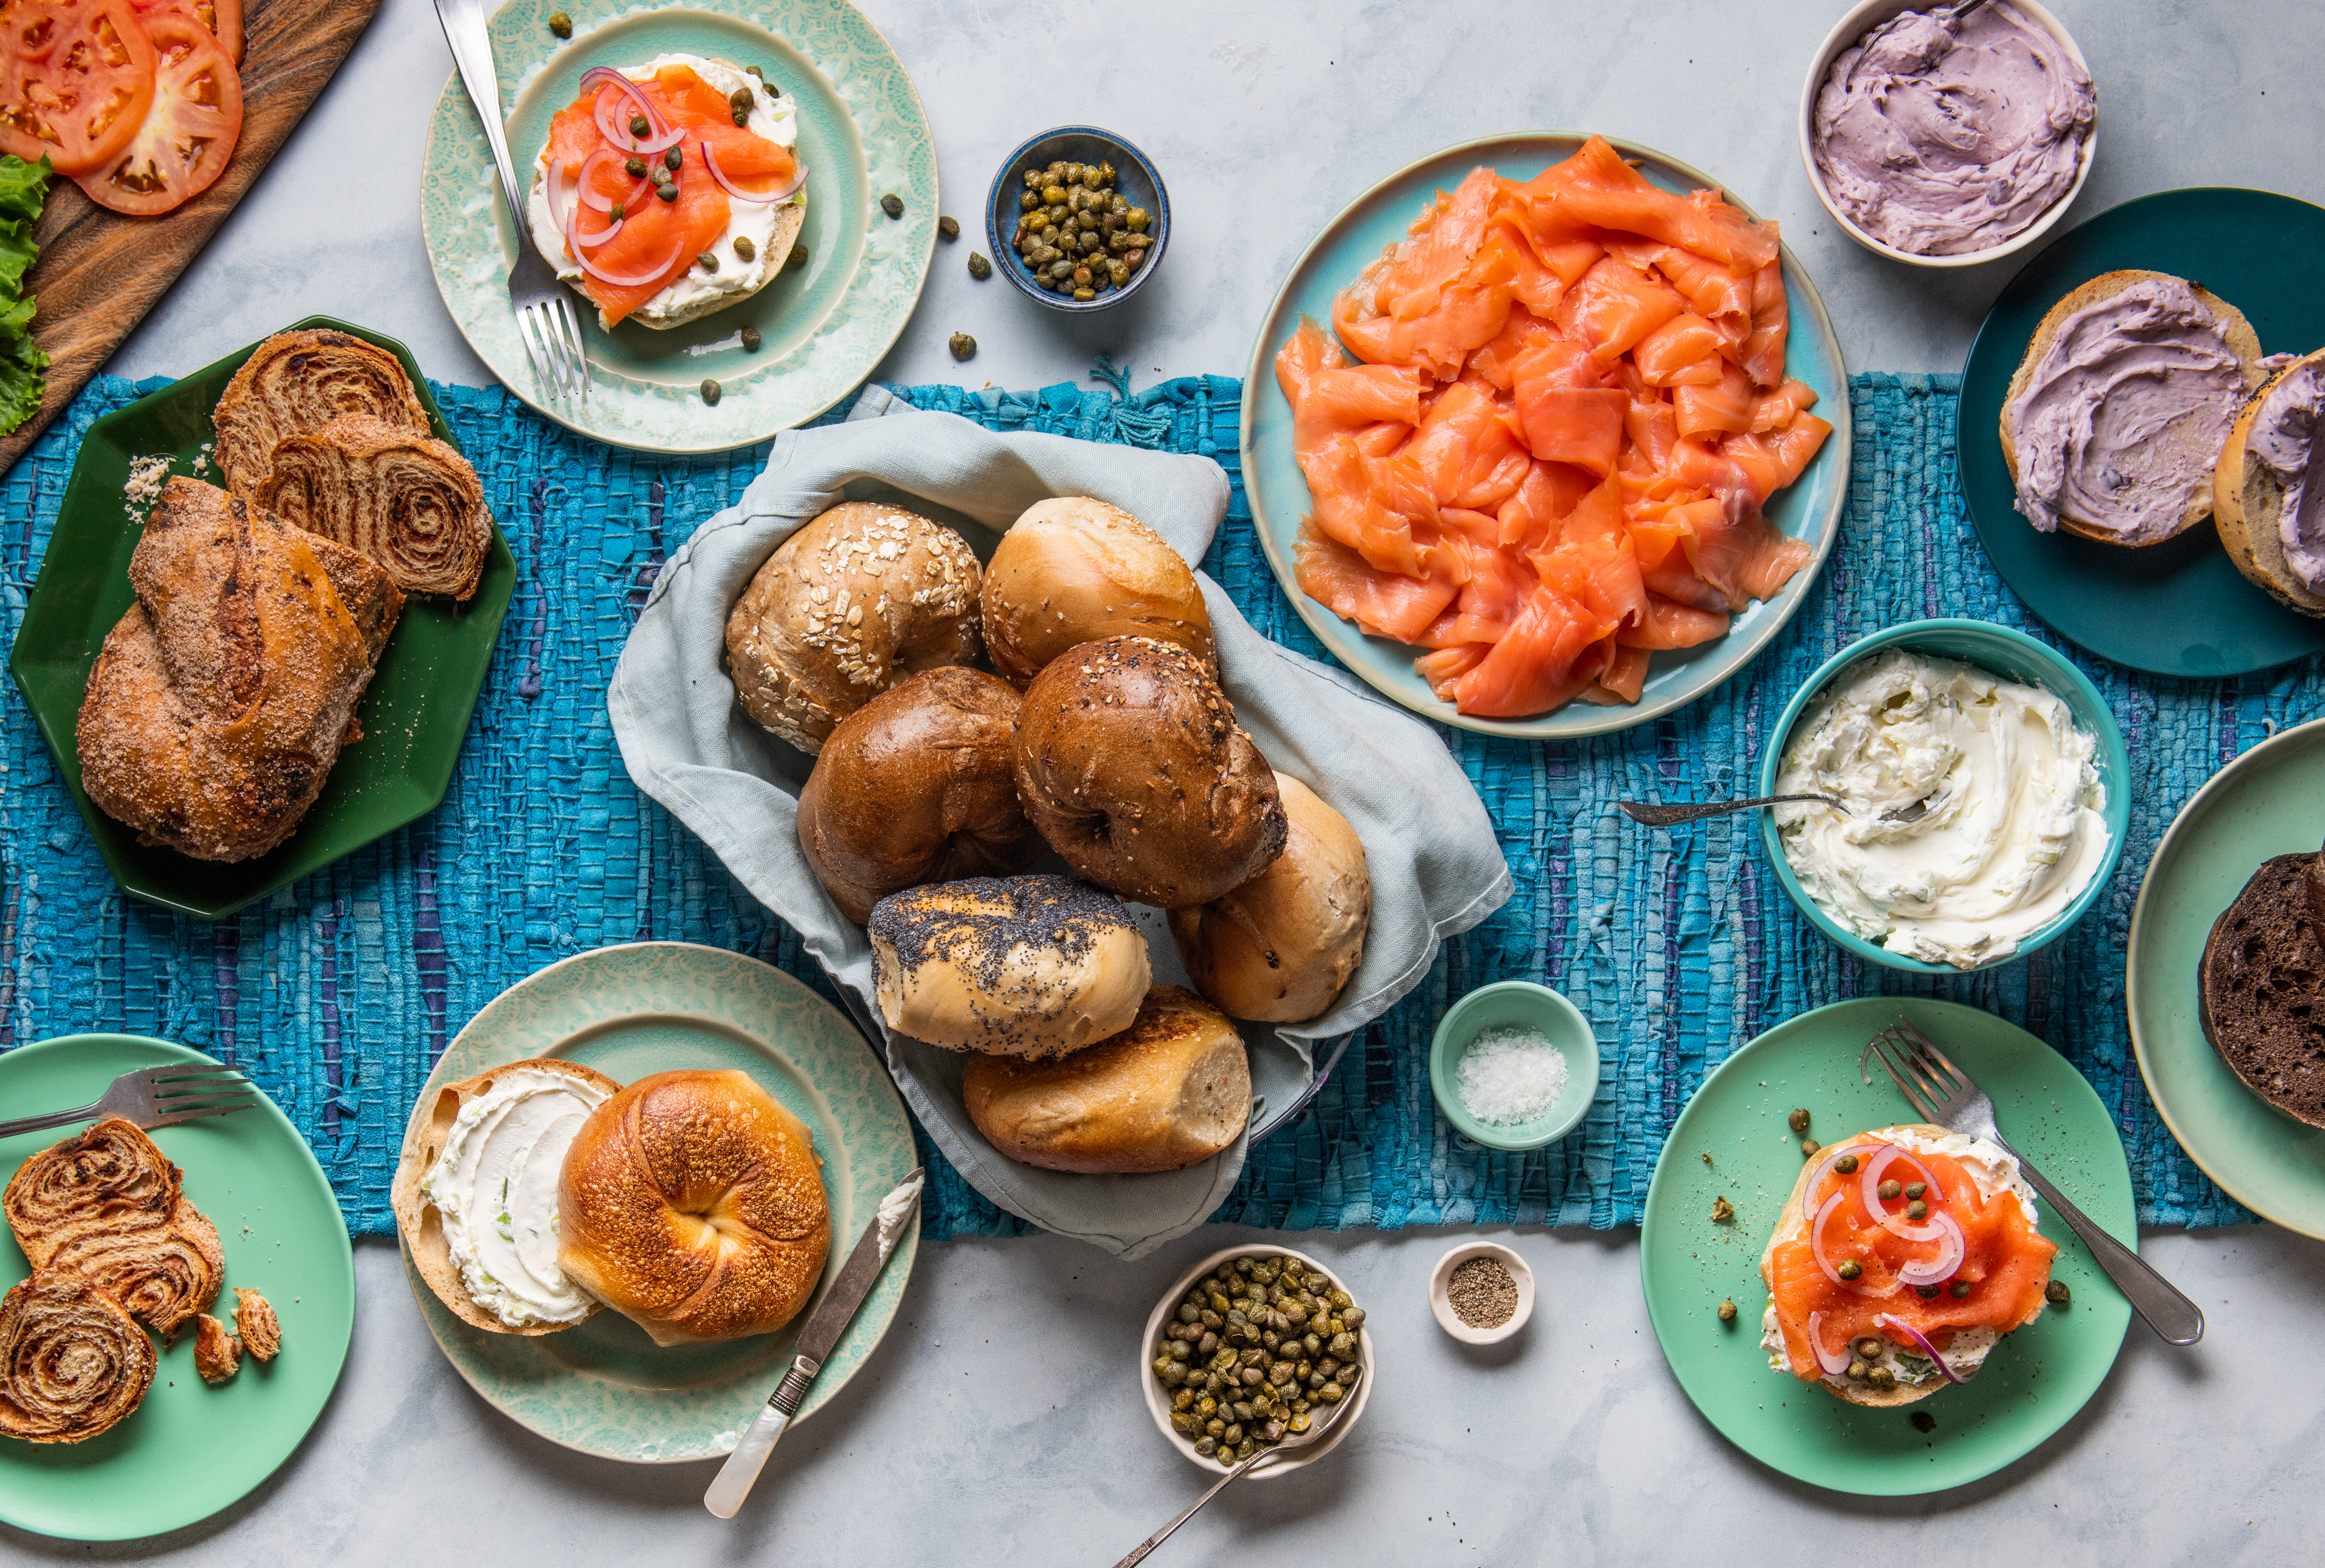 Table with spreads and bagels